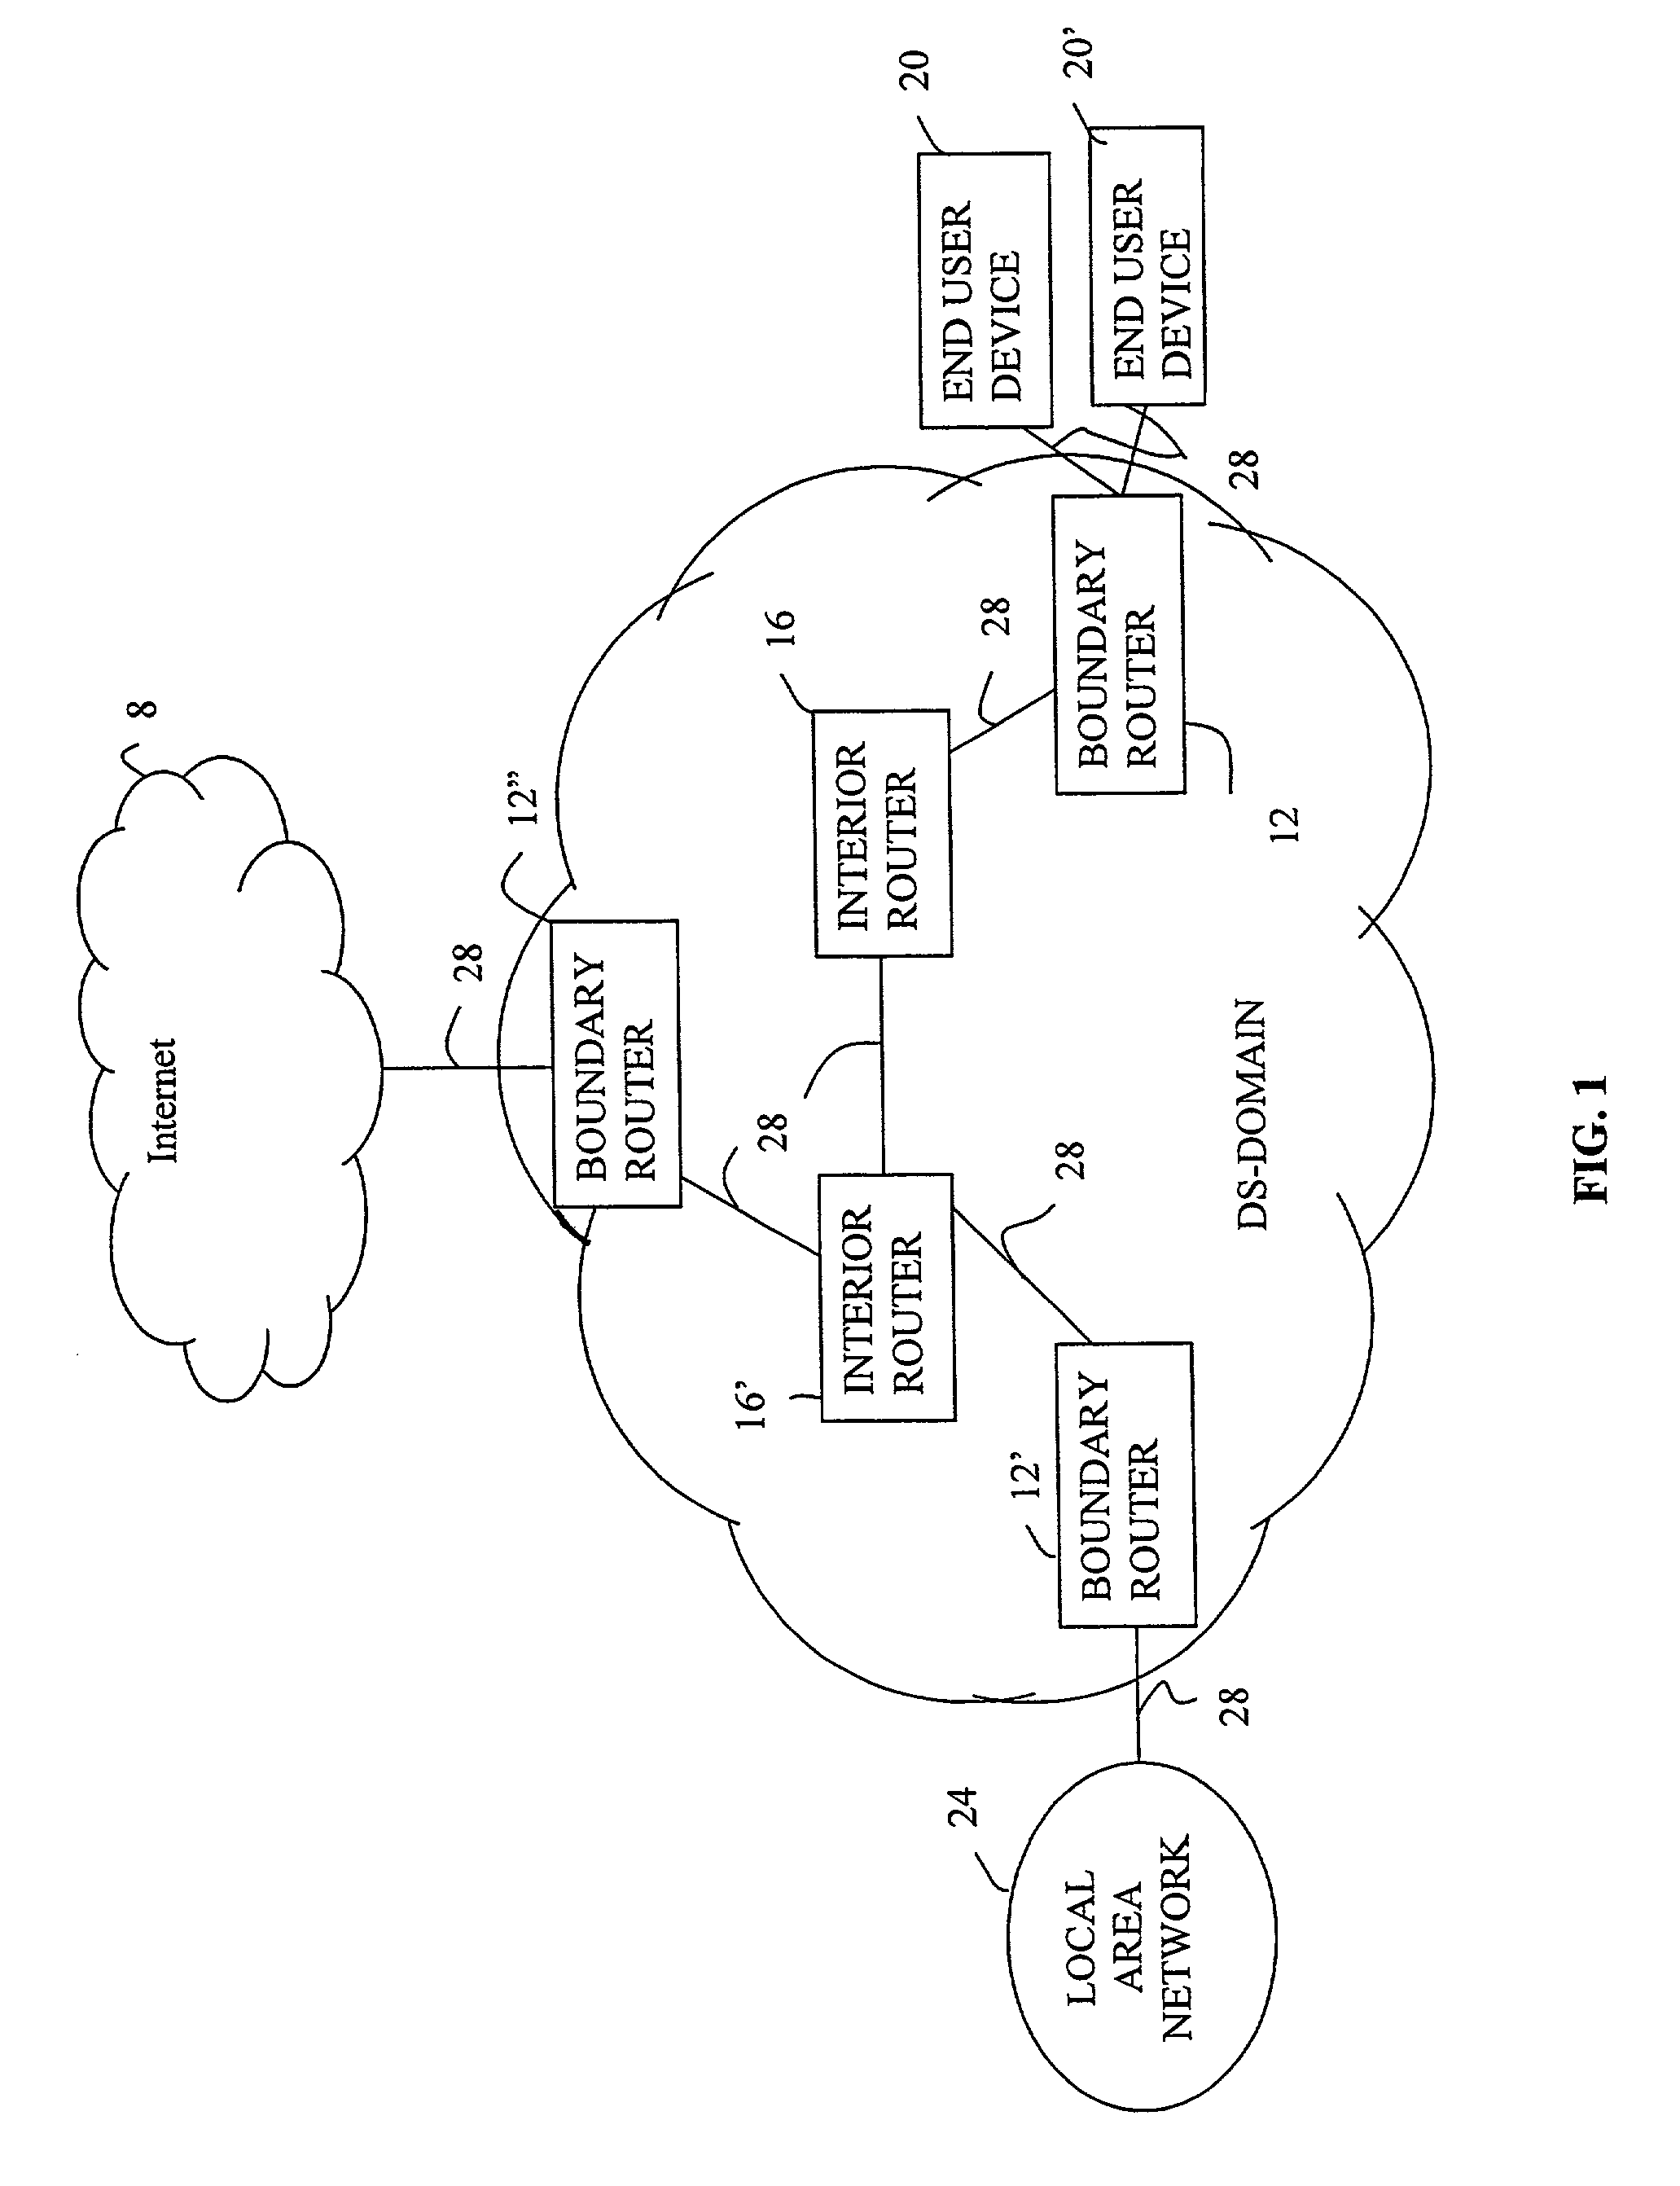 Scheduling mechanisms for use in mobile ad hoc wireless networks for achieving a differentiated services per-hop behavior